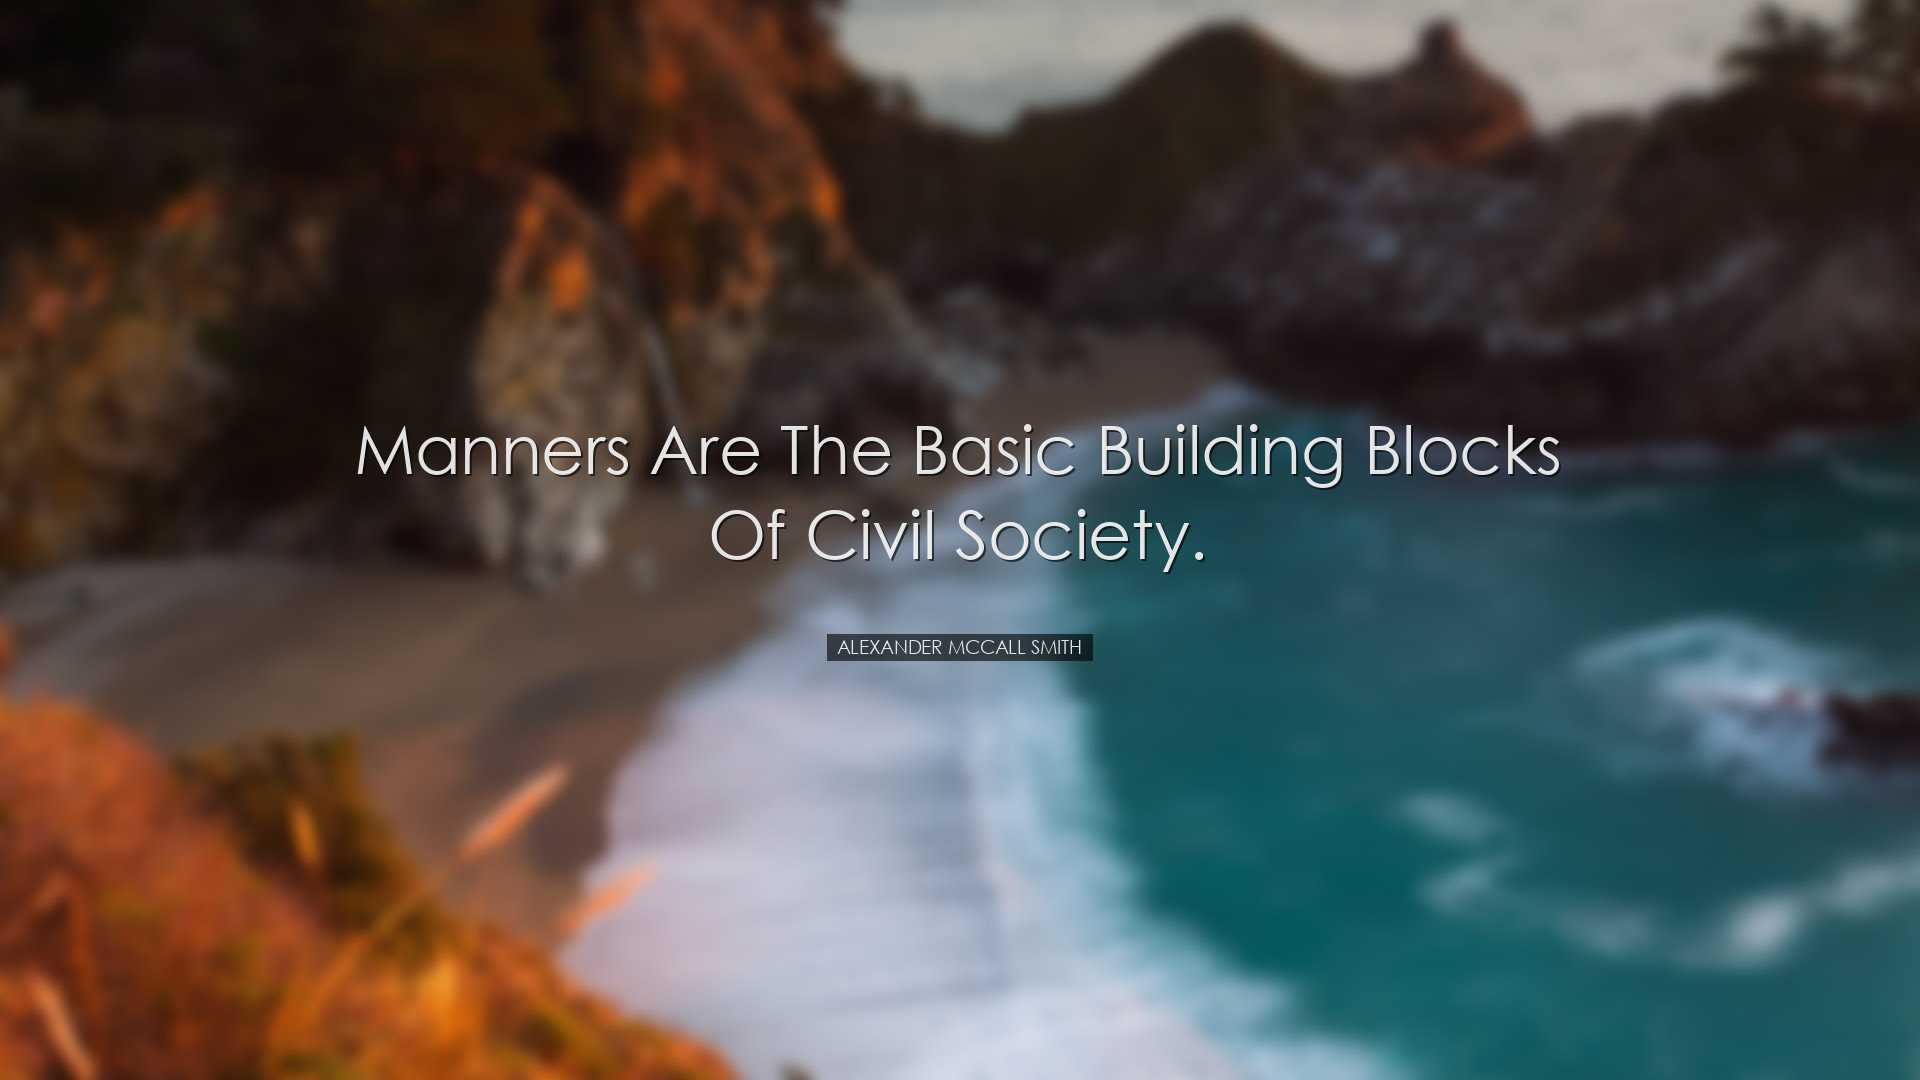 Manners are the basic building blocks of civil society. - Alexande